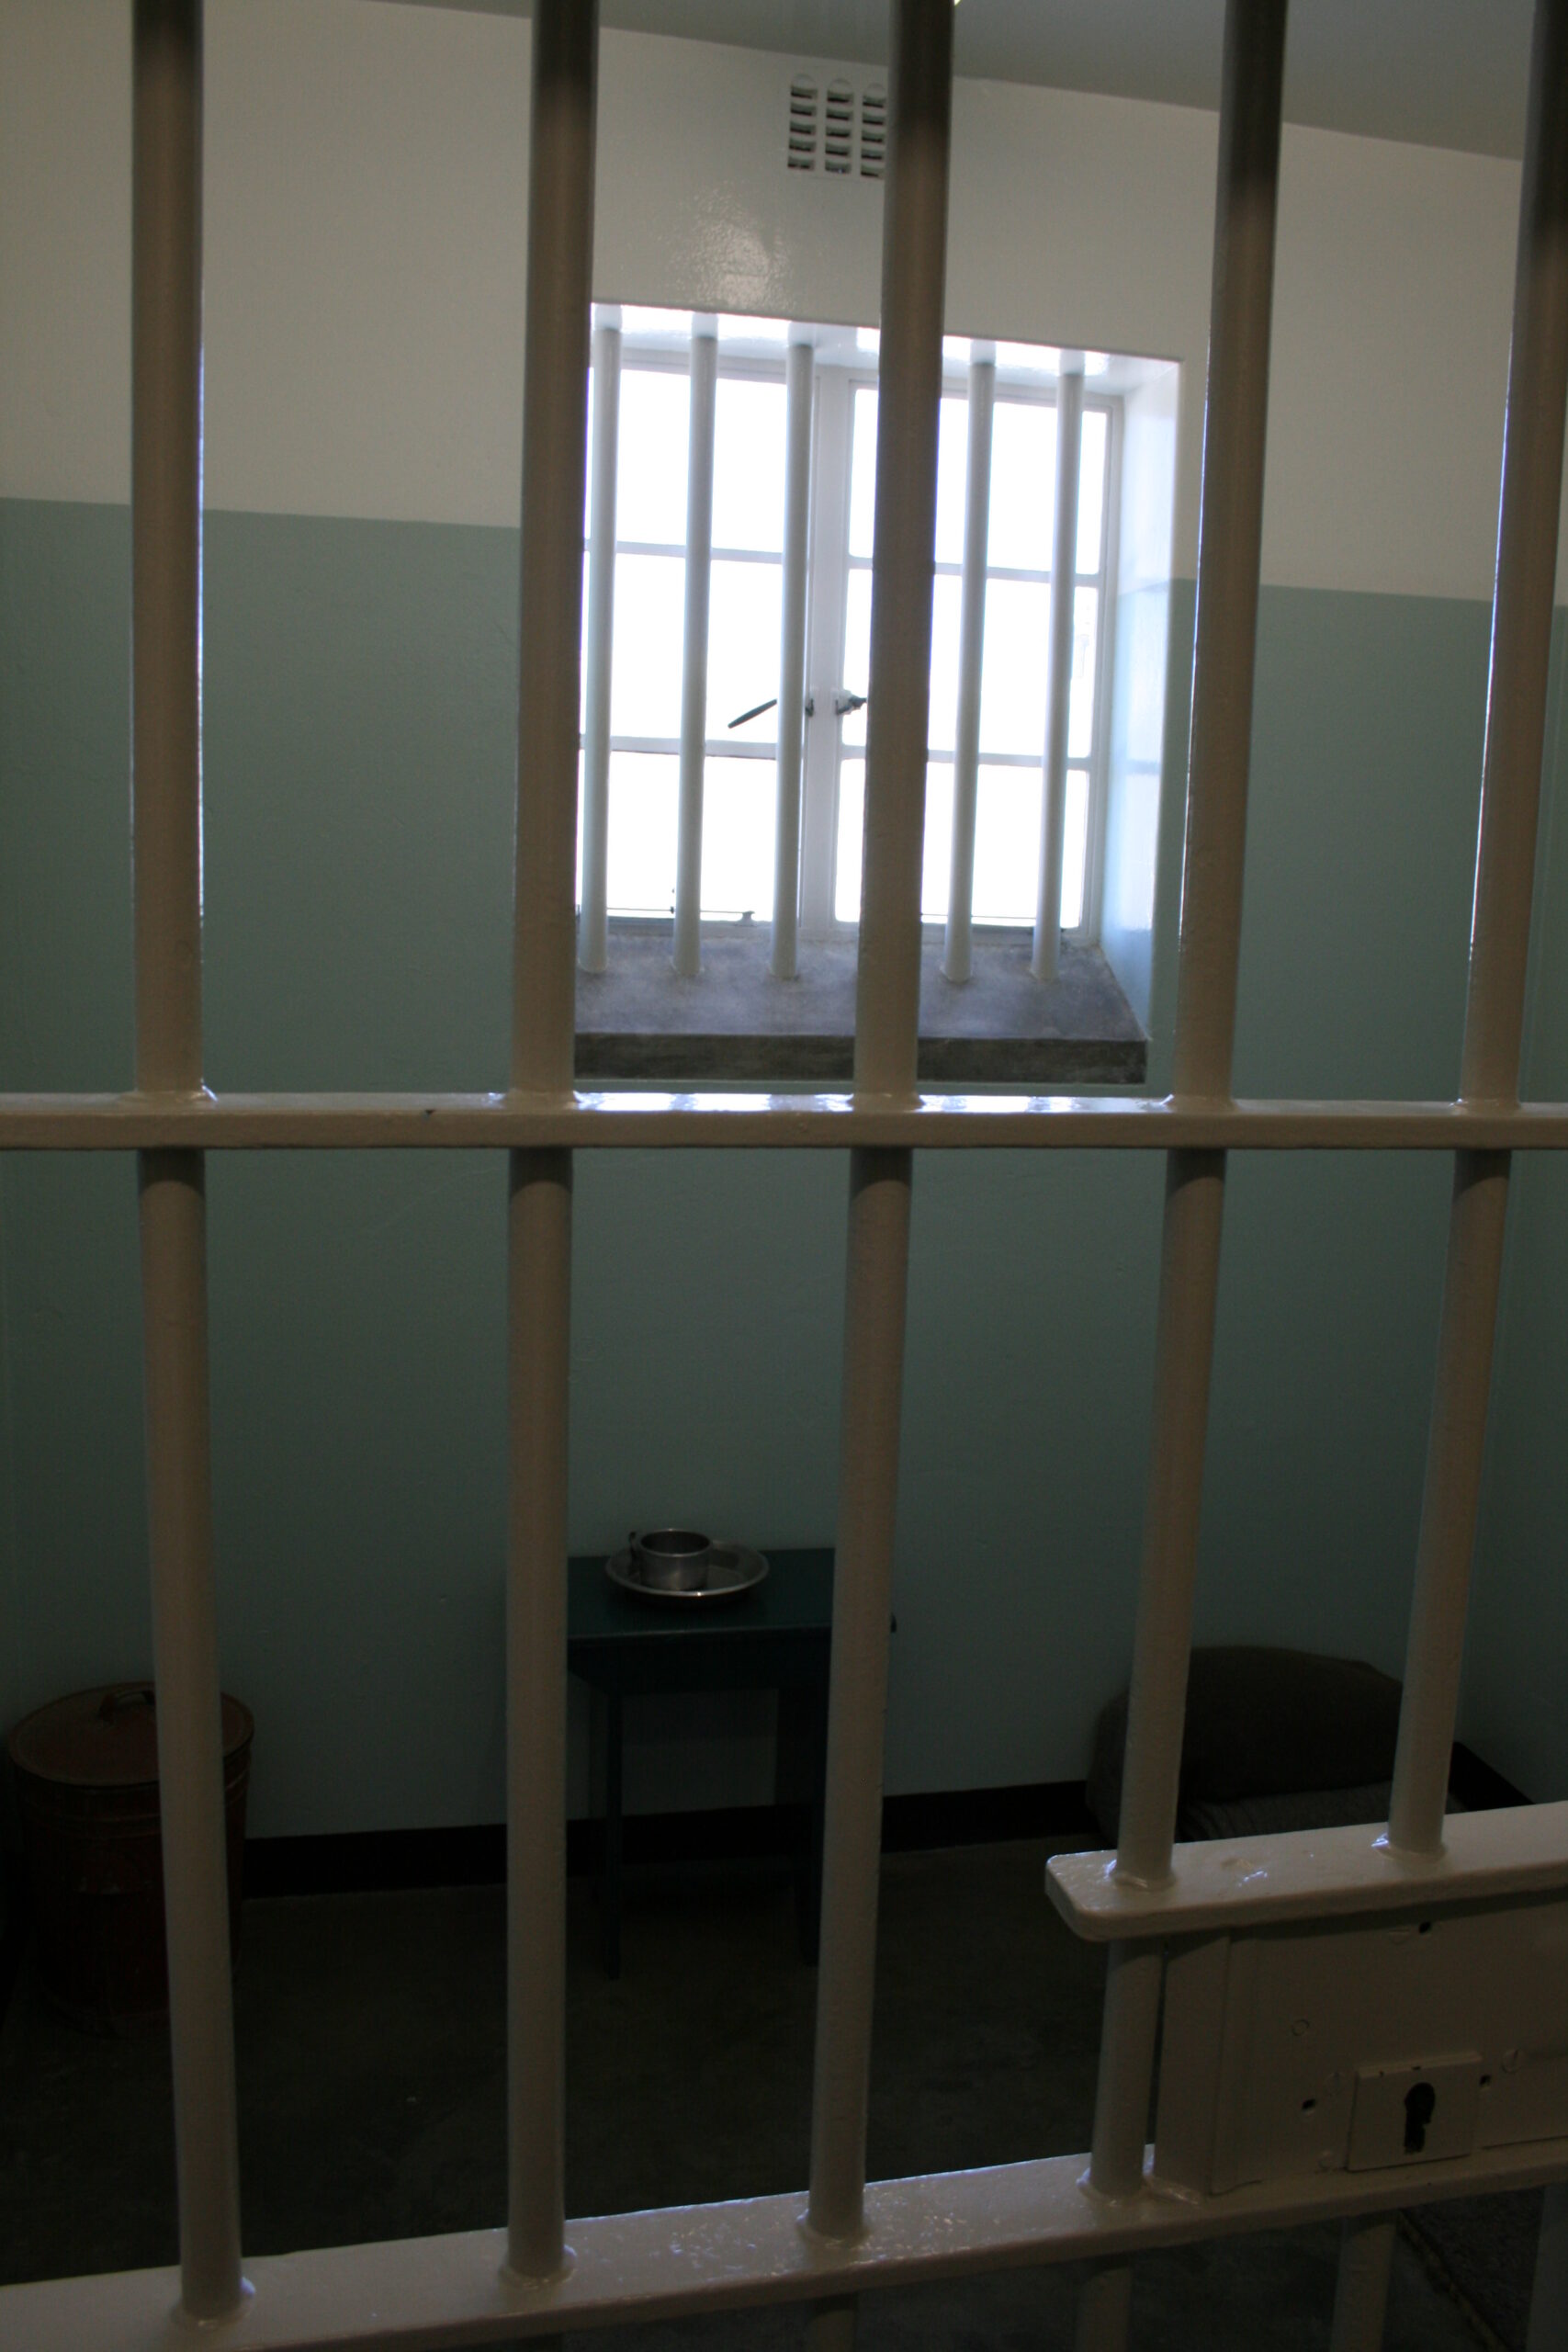 Nelson Mandel's prison cell sits on Robben Island near Cape Town, South Africa.